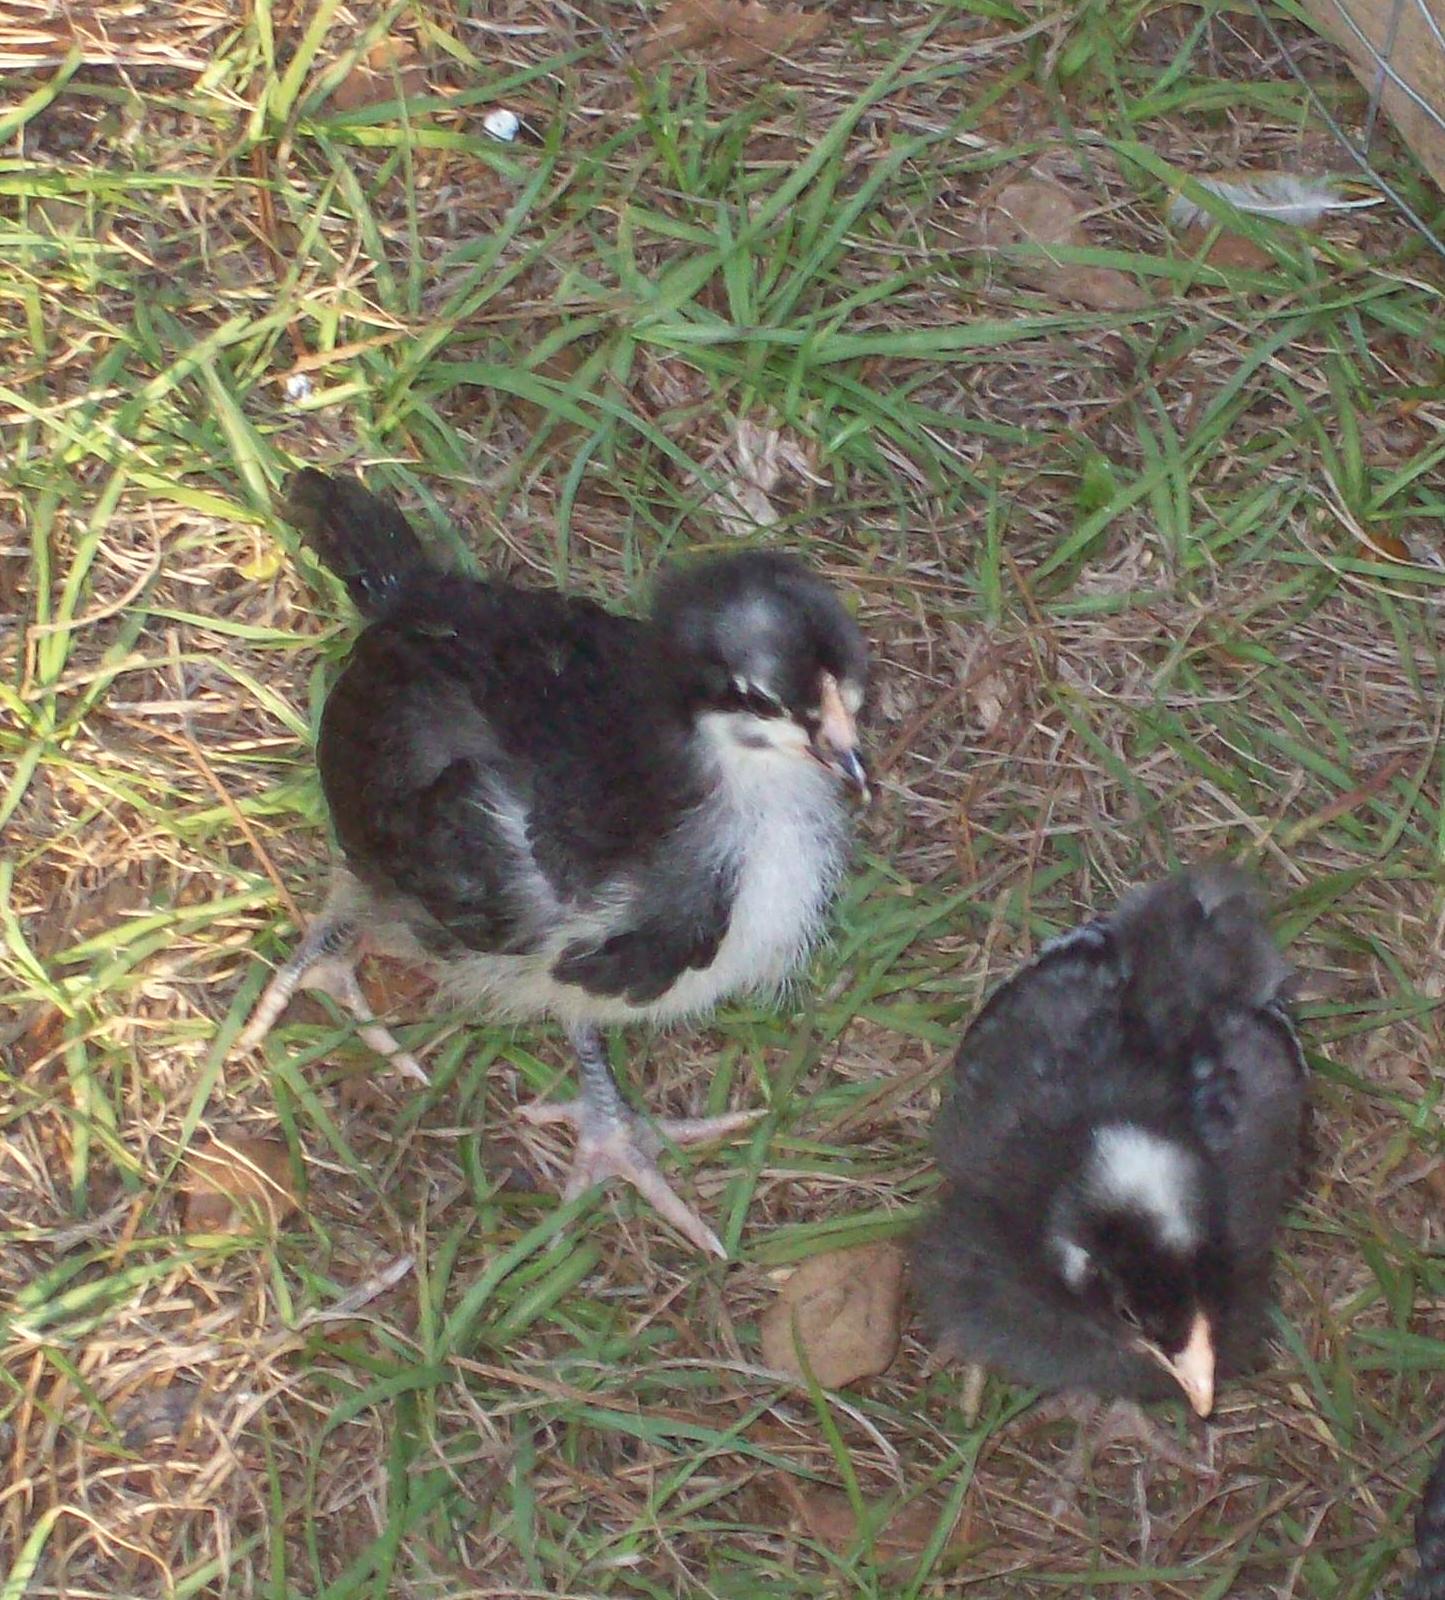 Black chick with white/yellow underside and white wing tips.